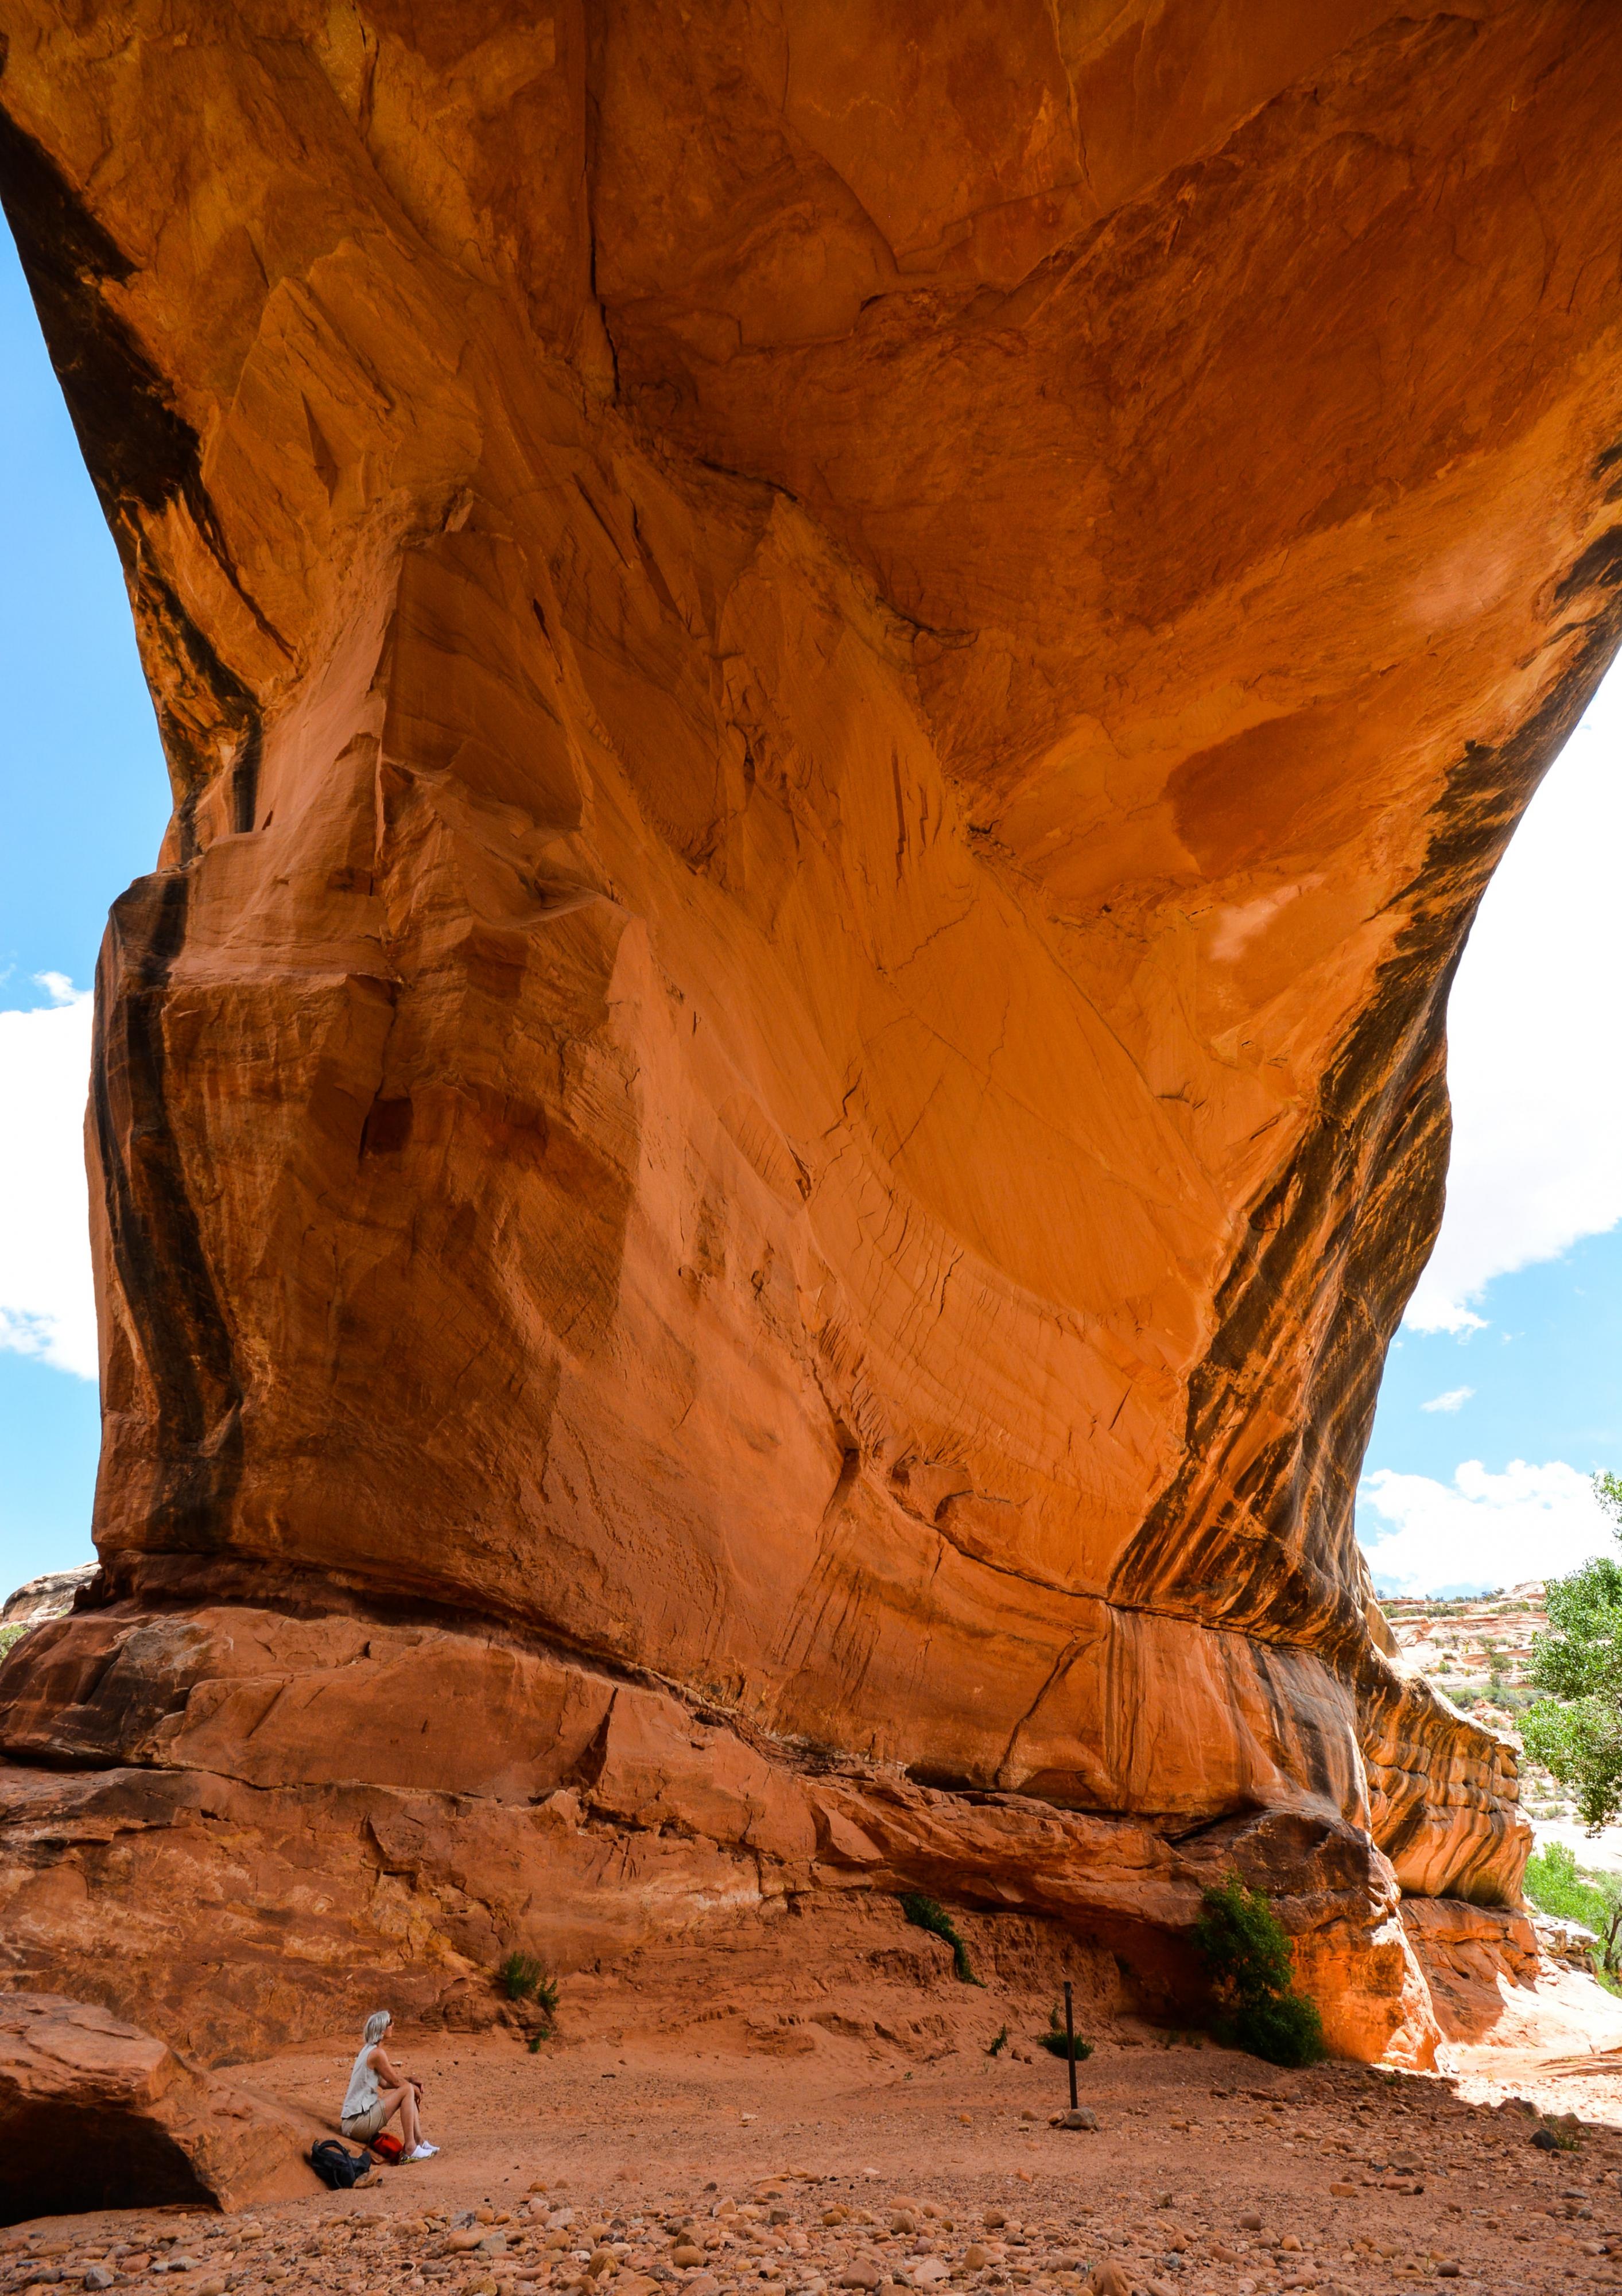 Tourism in Southern Utah's red rock country